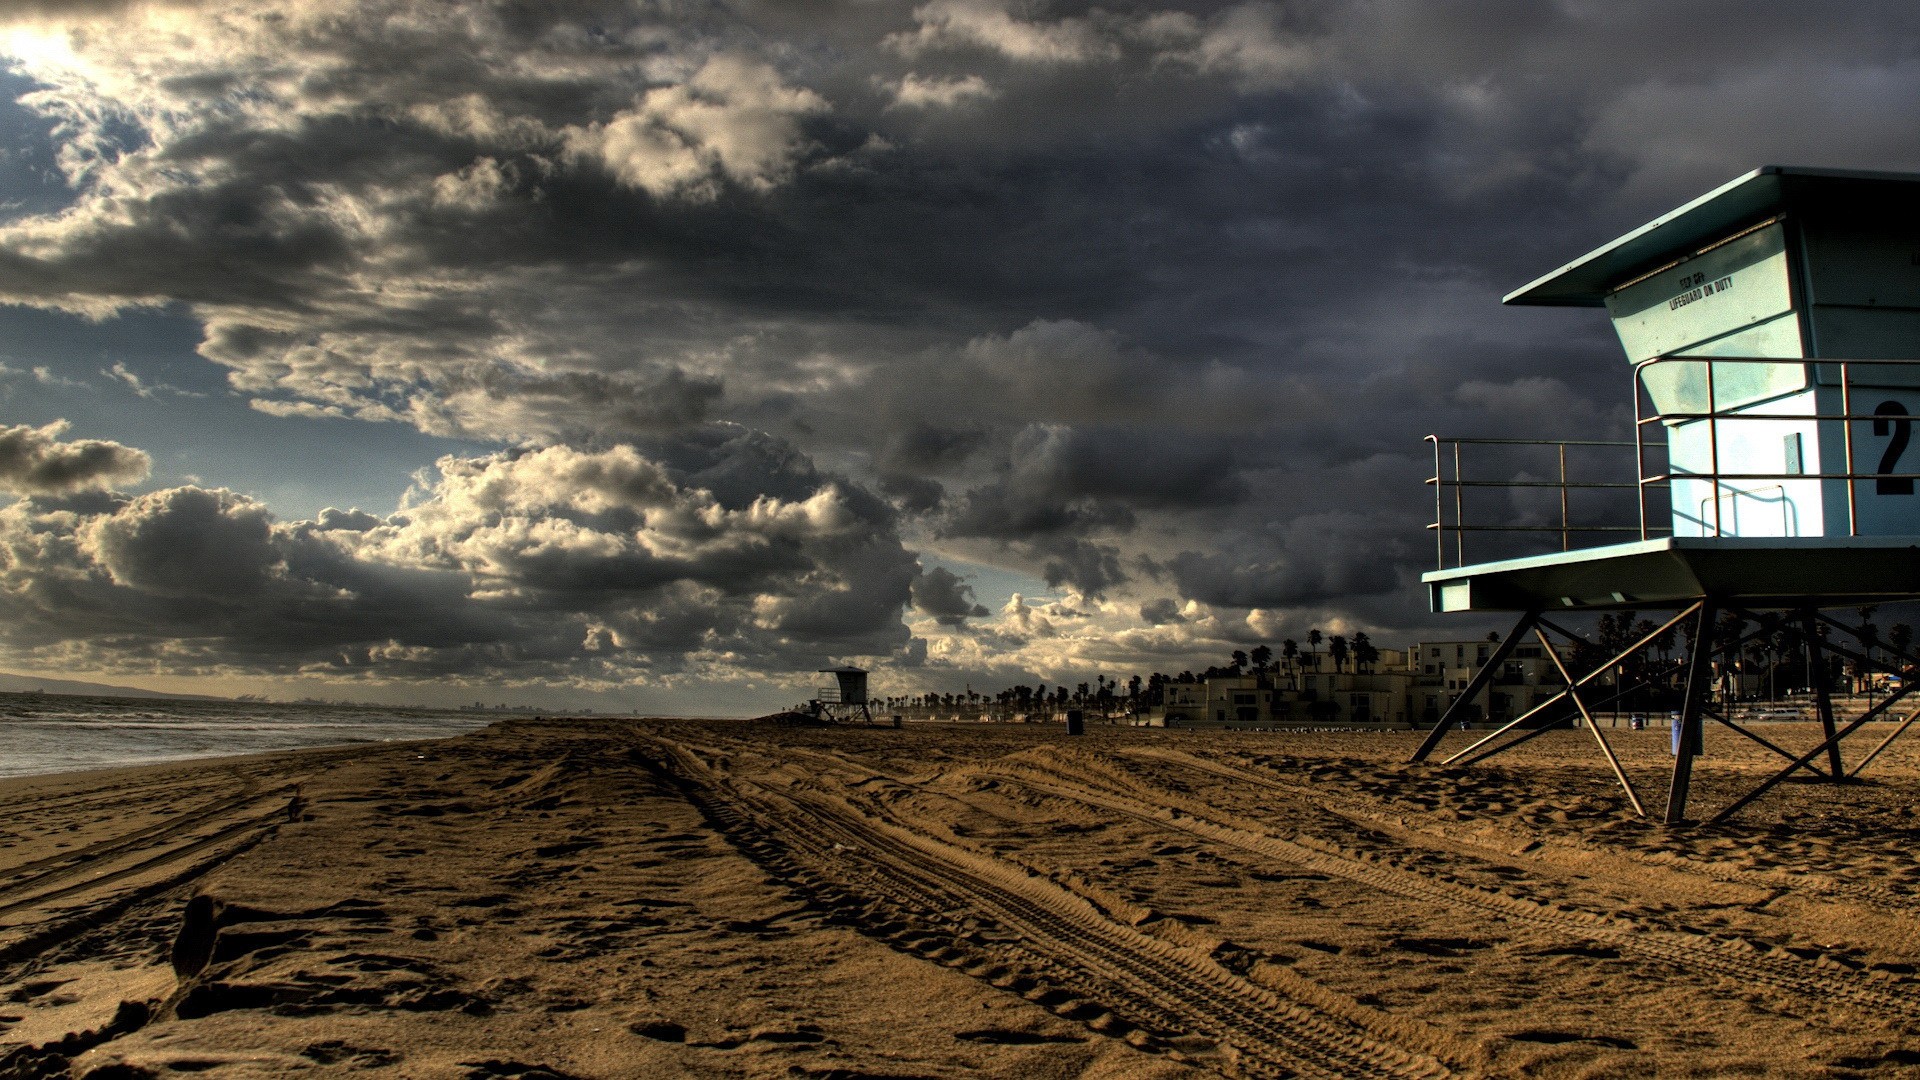 Ocean Clouds Landscapes Nature Beach Storm California Town Hdr